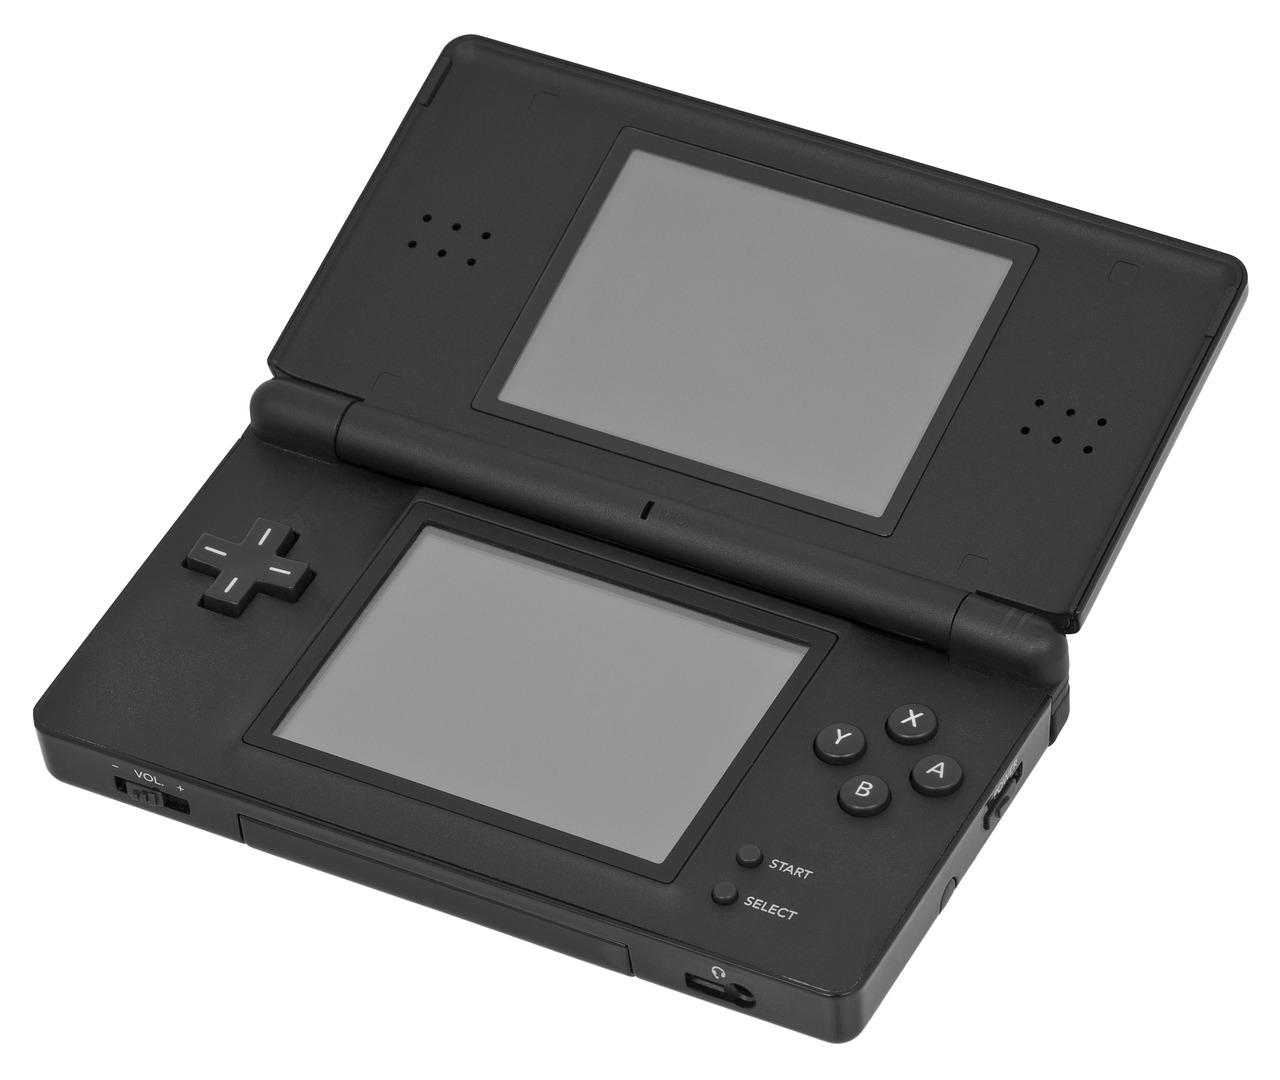 a black game console sitting on top of a white surface, a computer rendering, nintendo ds video game, maintenance photo